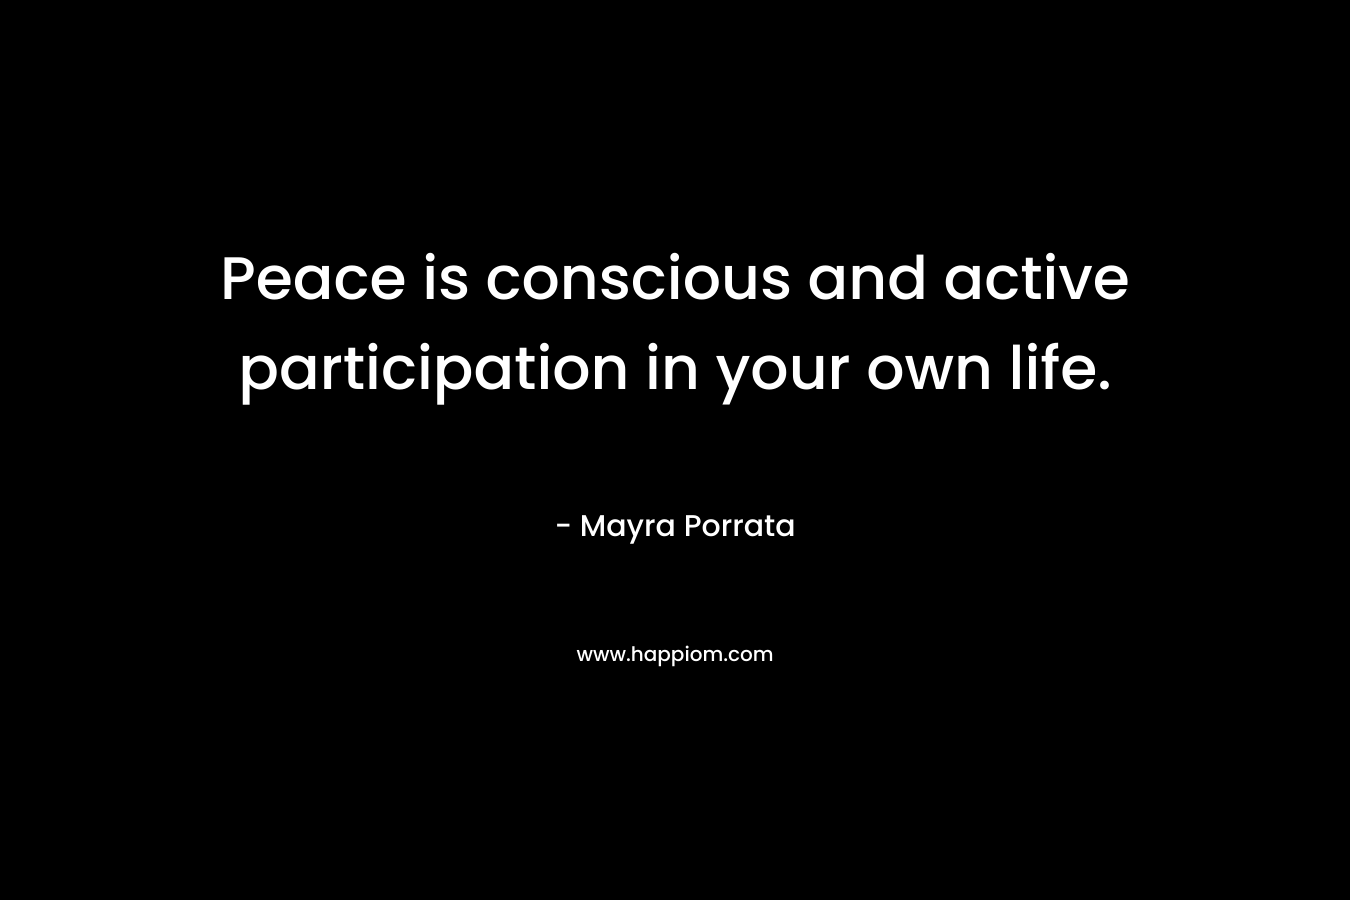 Peace is conscious and active participation in your own life.